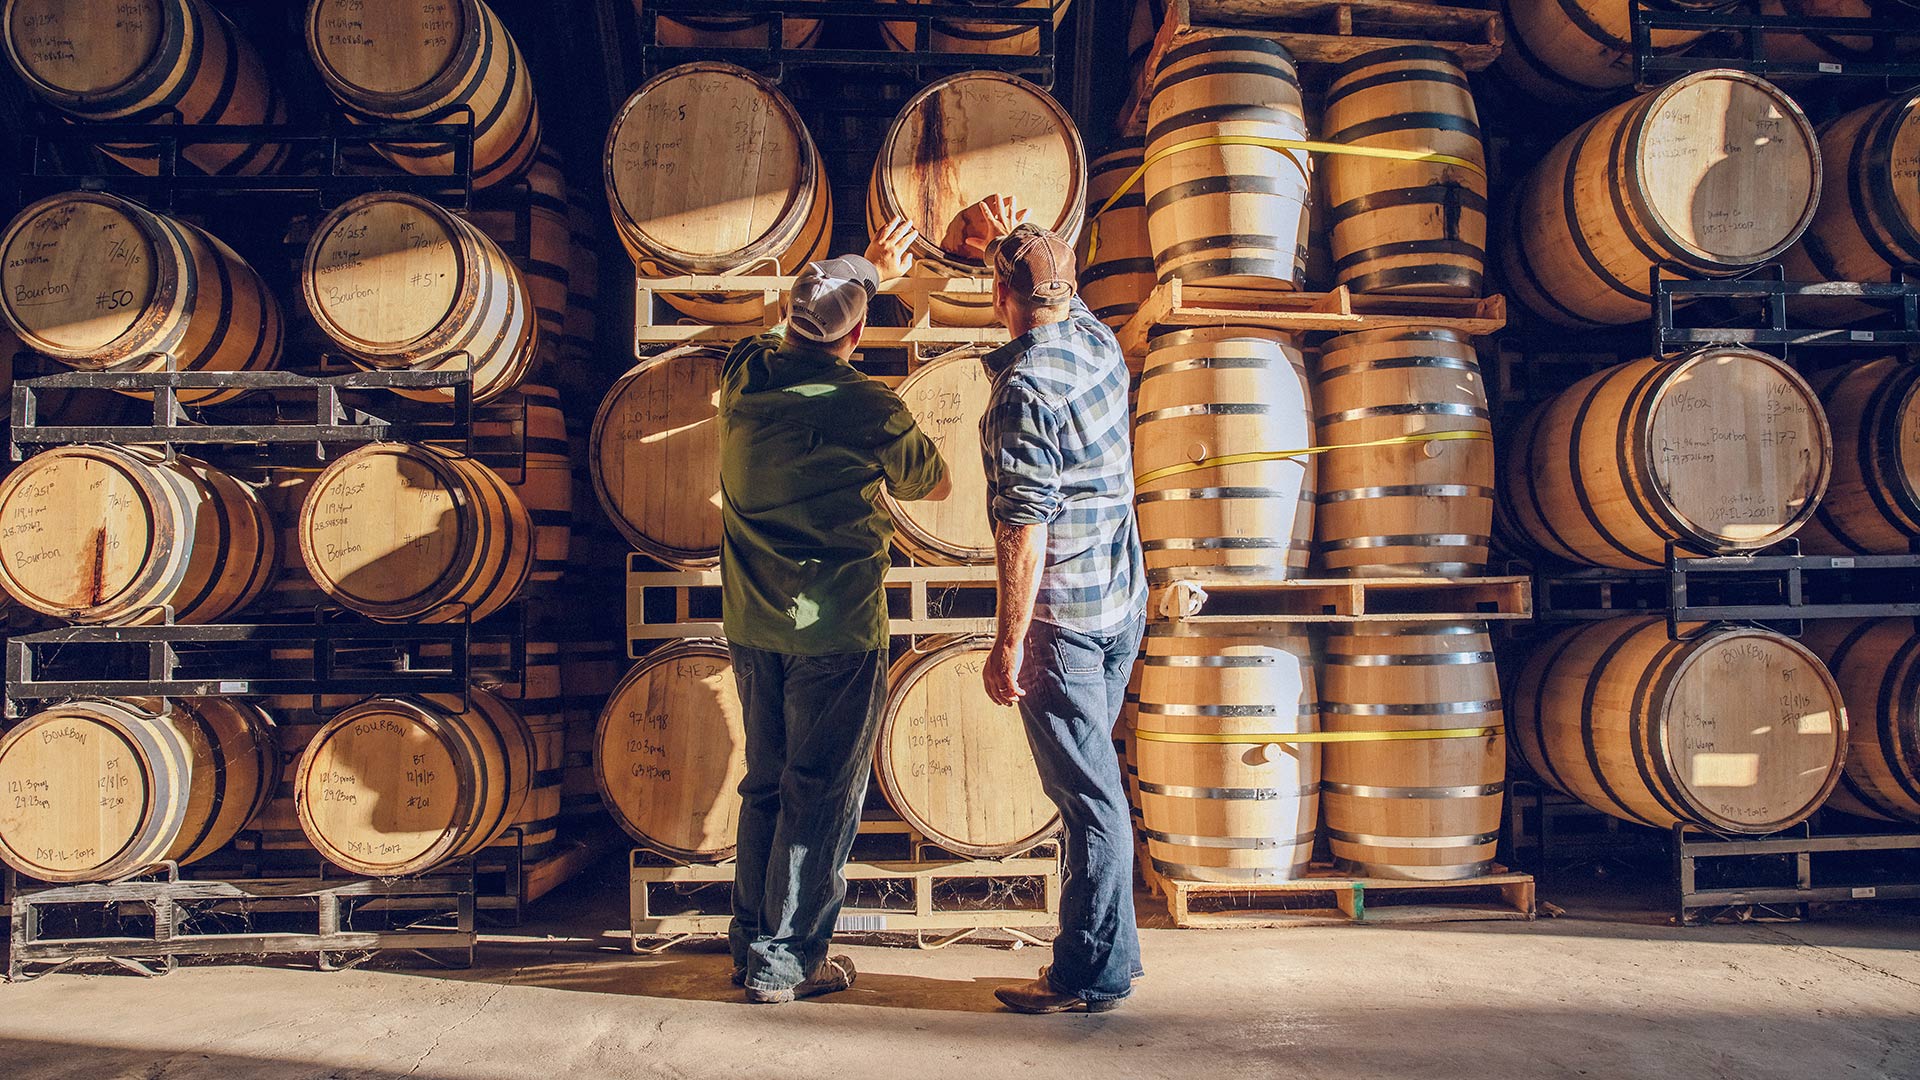 People looking at whiskey in barrels at a distillery